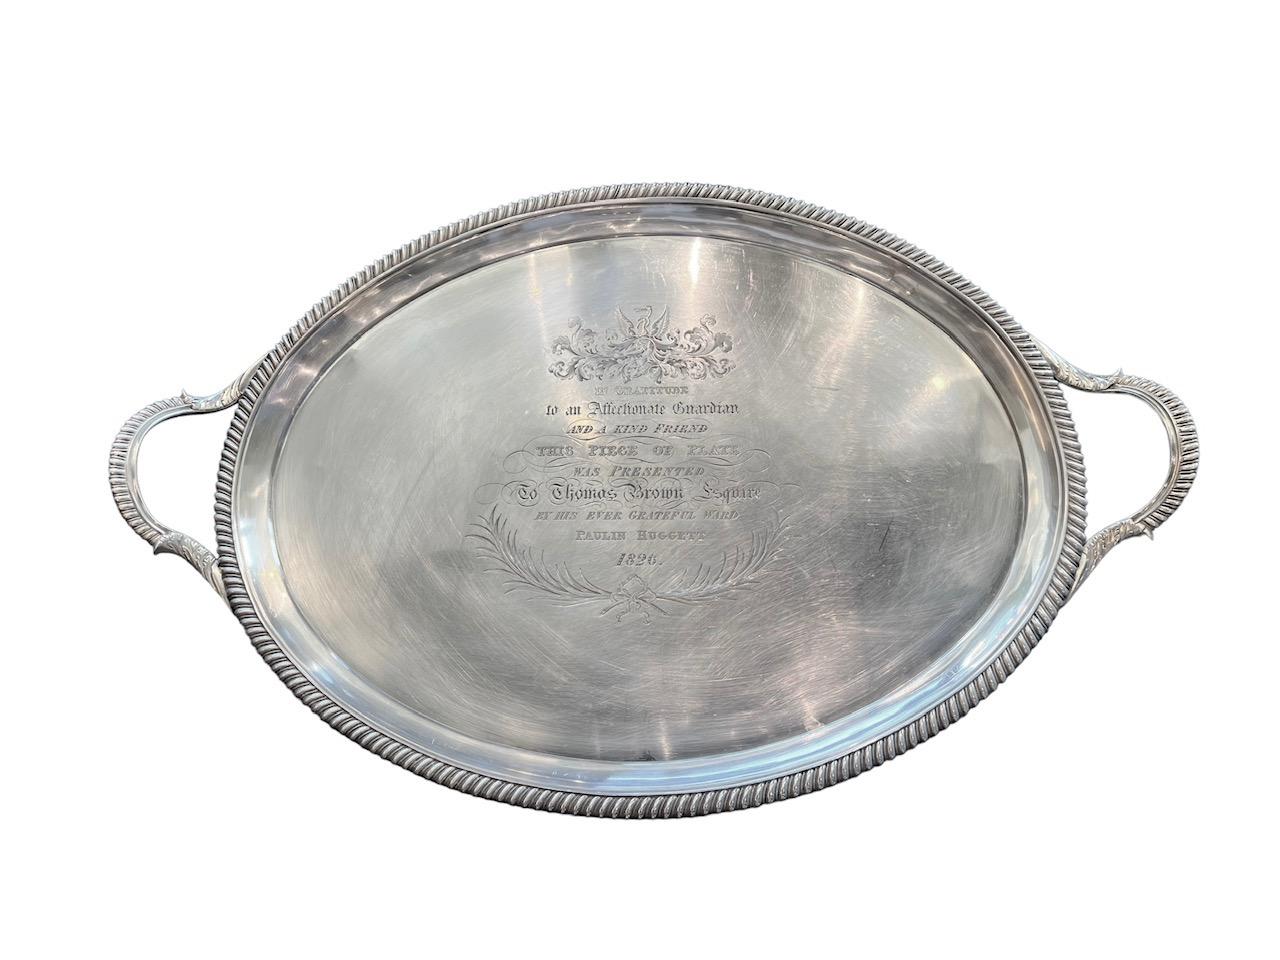 Crafted in the year 1823 in London, this remarkable English George IV silver presentation tray, expertly created by the skilled silversmith John Mewburn, stands as a testament to the artistry and elegance of its era.

Exquisitely designed, the tray